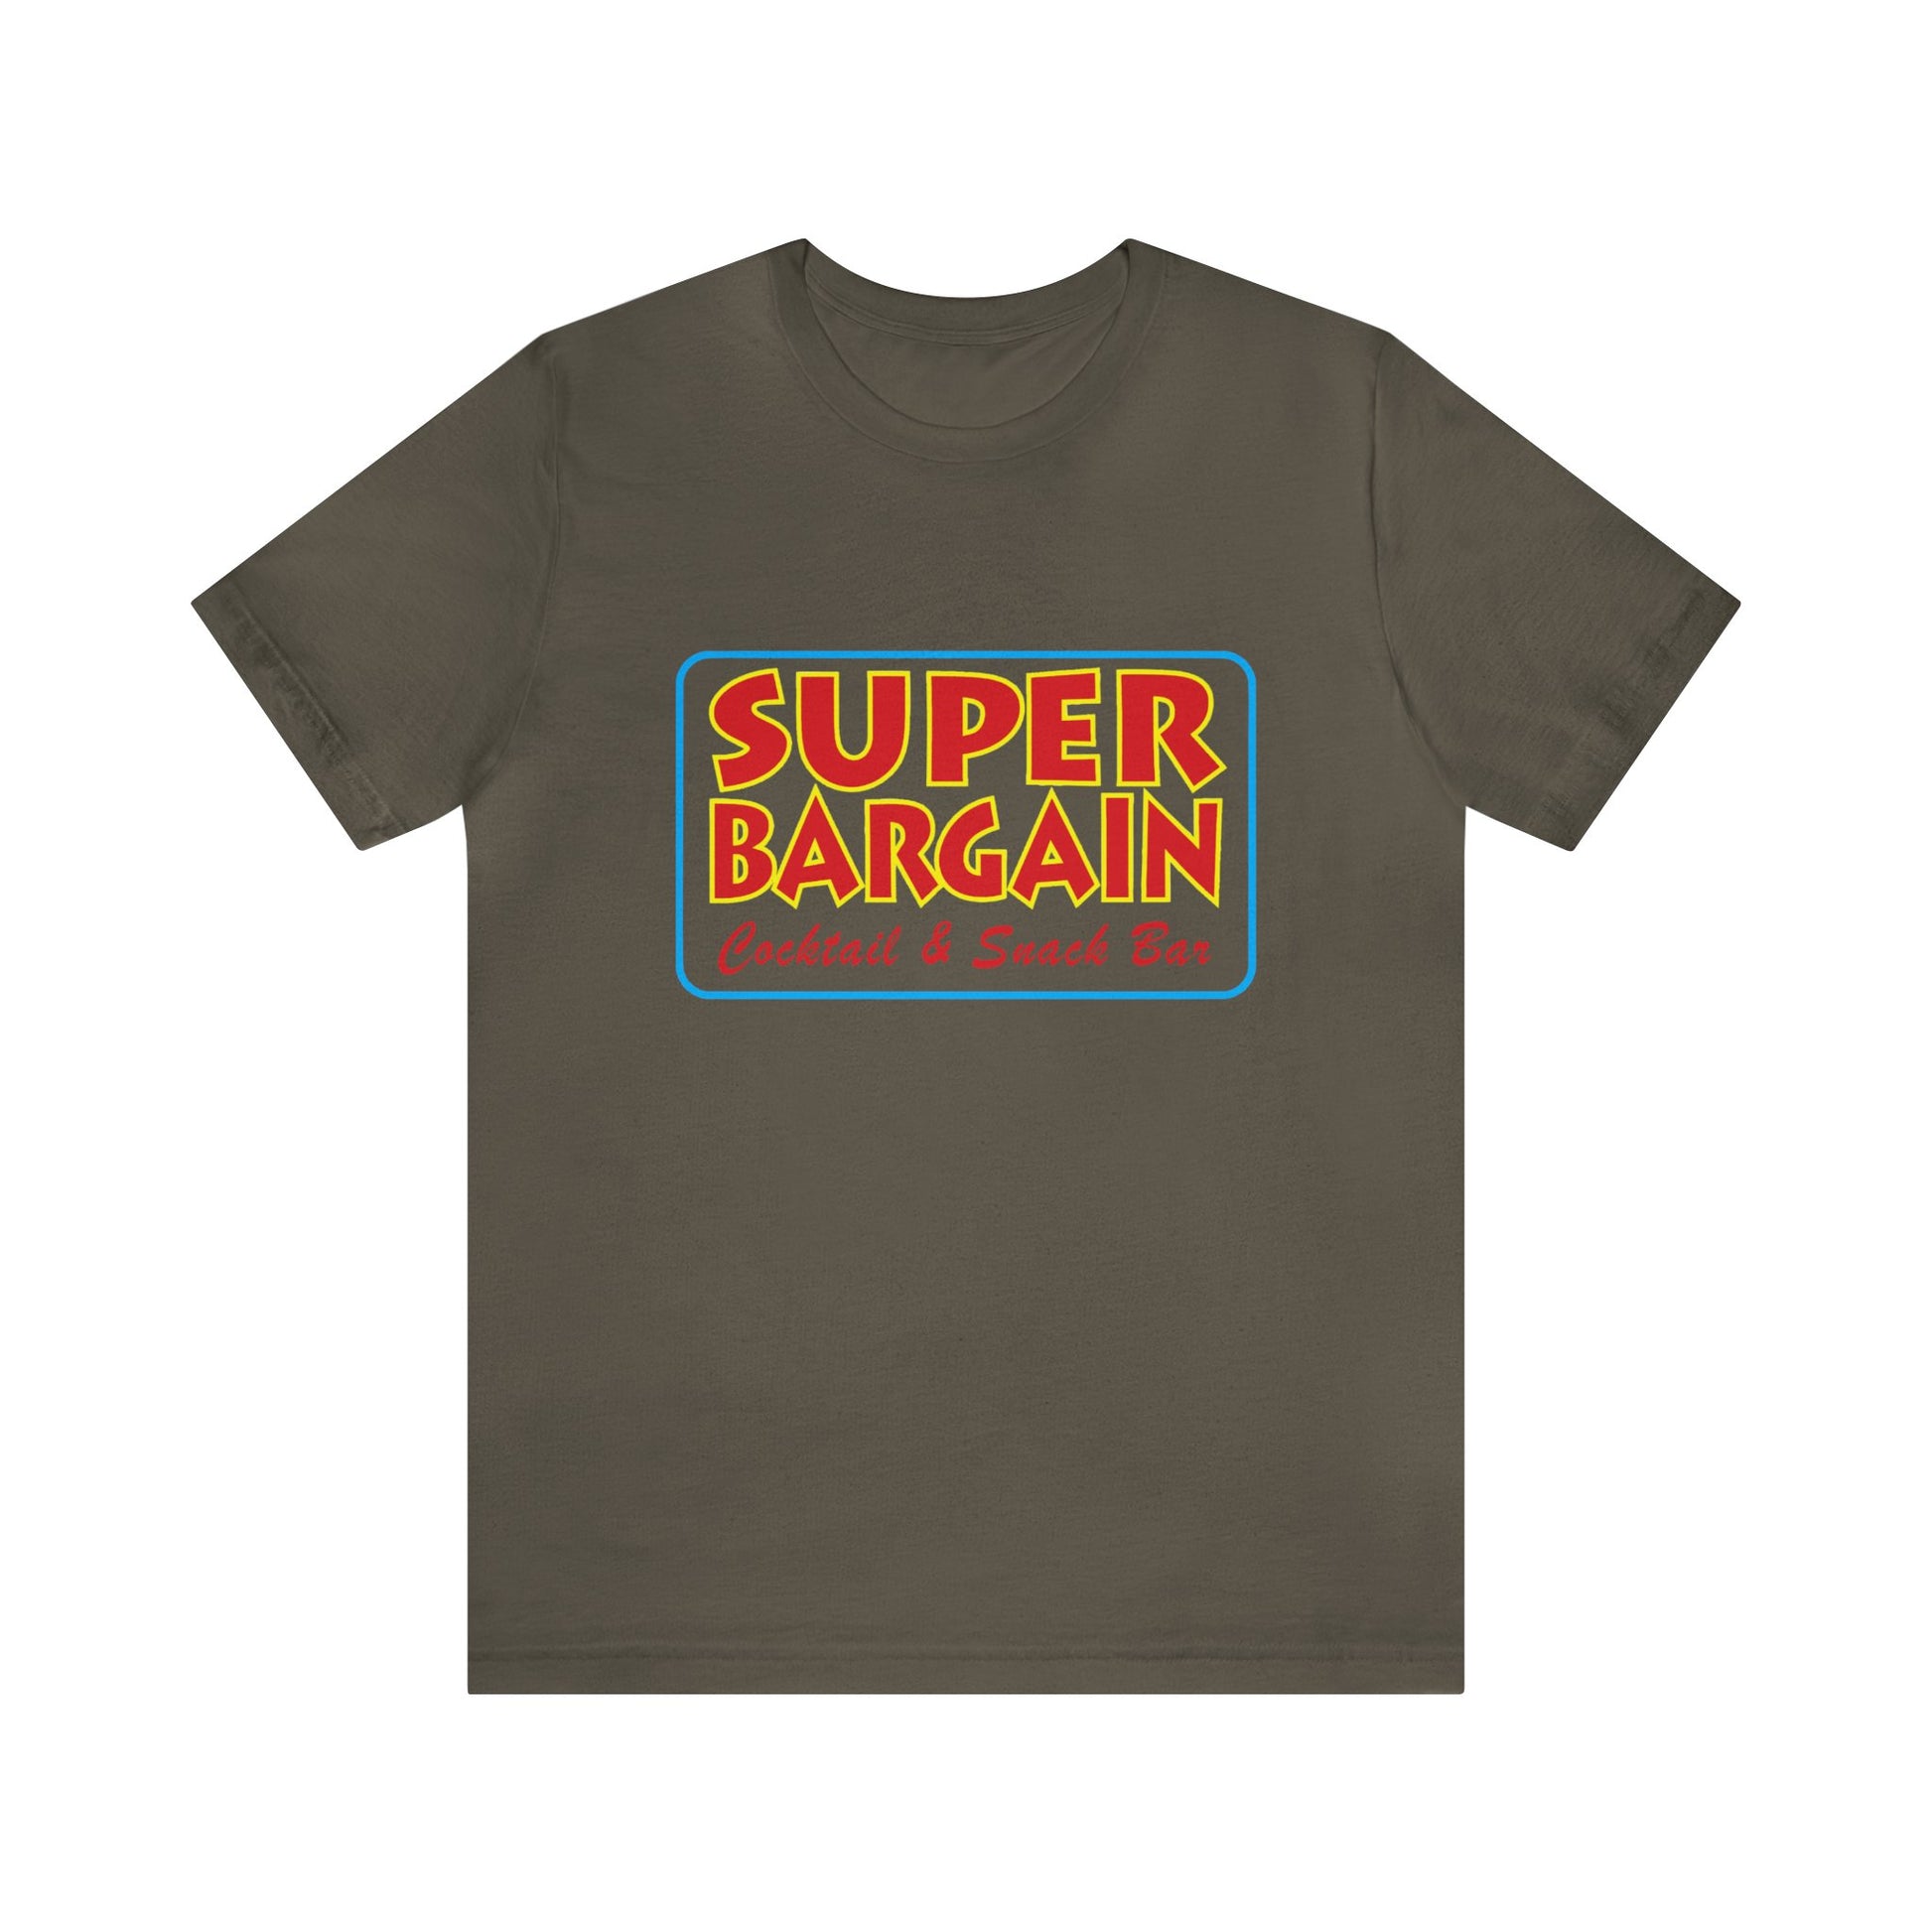 A plain olive green Unisex Jersey Short Sleeve Tee by Printify featuring a colorful rectangular graphic with the text "SUPER BARGAIN" in bold, surrounded by a red outline and the words "Toronto Crafted & Smart Buy" below.